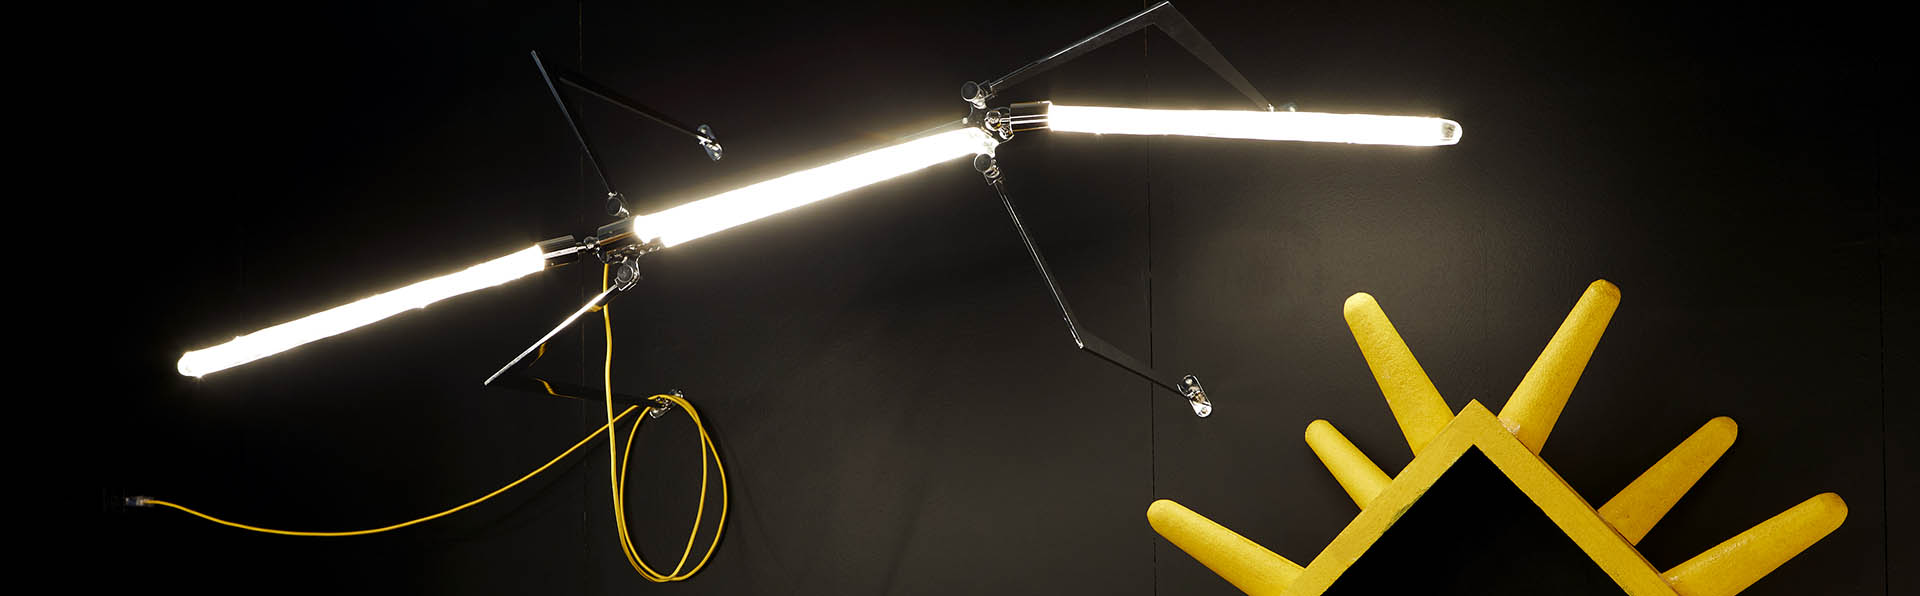 Stick insect lamp by Kevin Chu & Multifrome